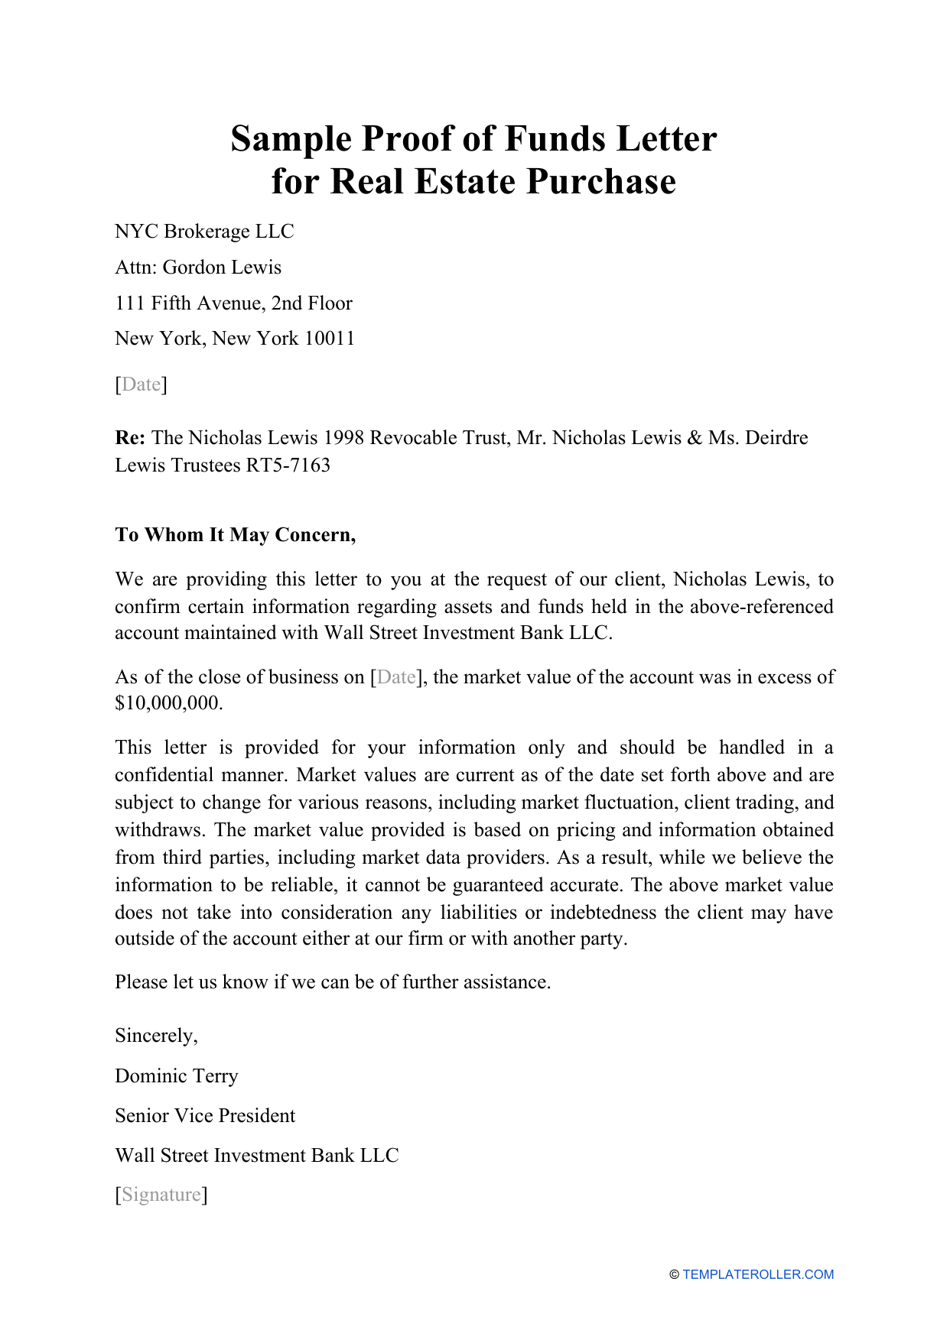 Sample Proof of Funds Letter for Real Estate Purchase Download Throughout Proof Of Funds Letter Template